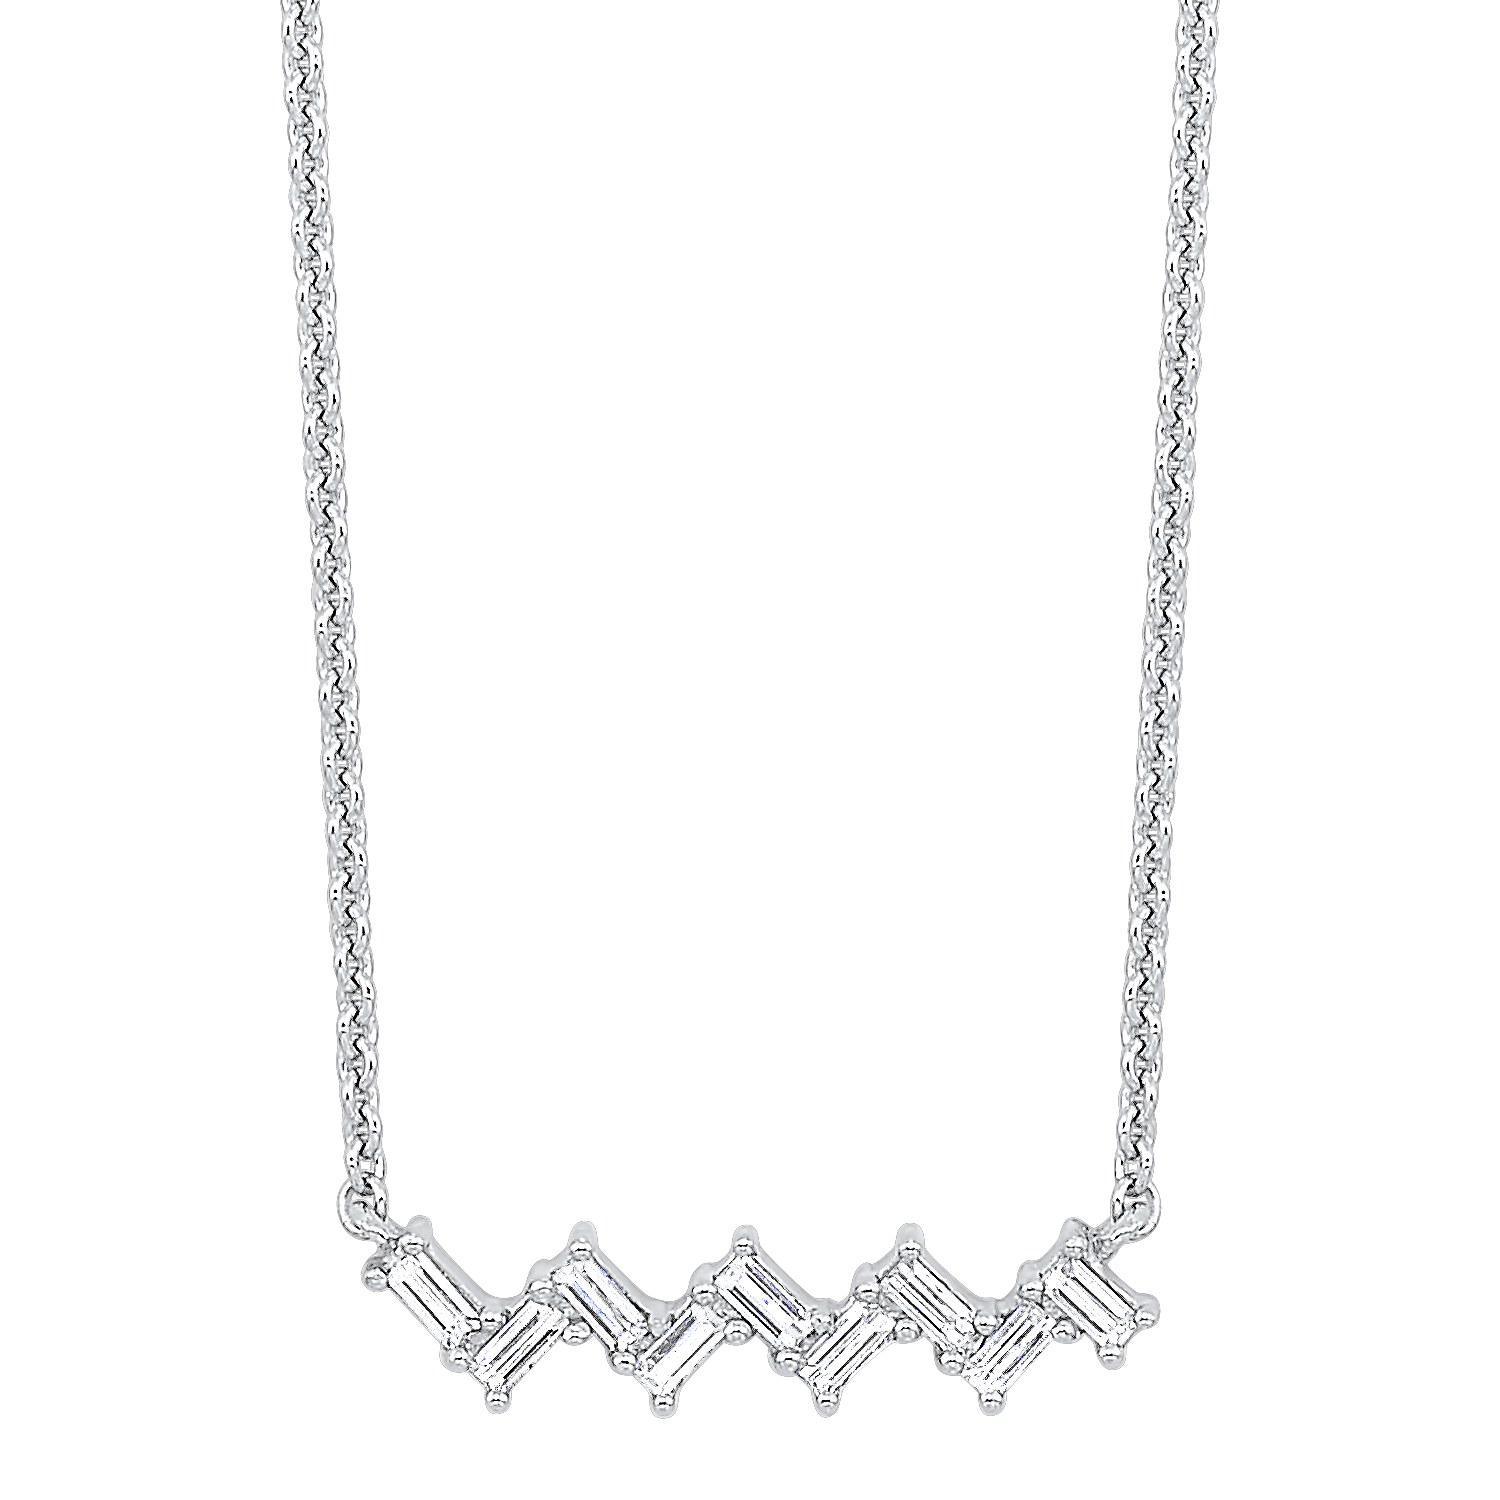 BW James Jewelers Necklace 16 Page Christmas Catalog Offer 14K Diamond Necklace 1/5 ctw